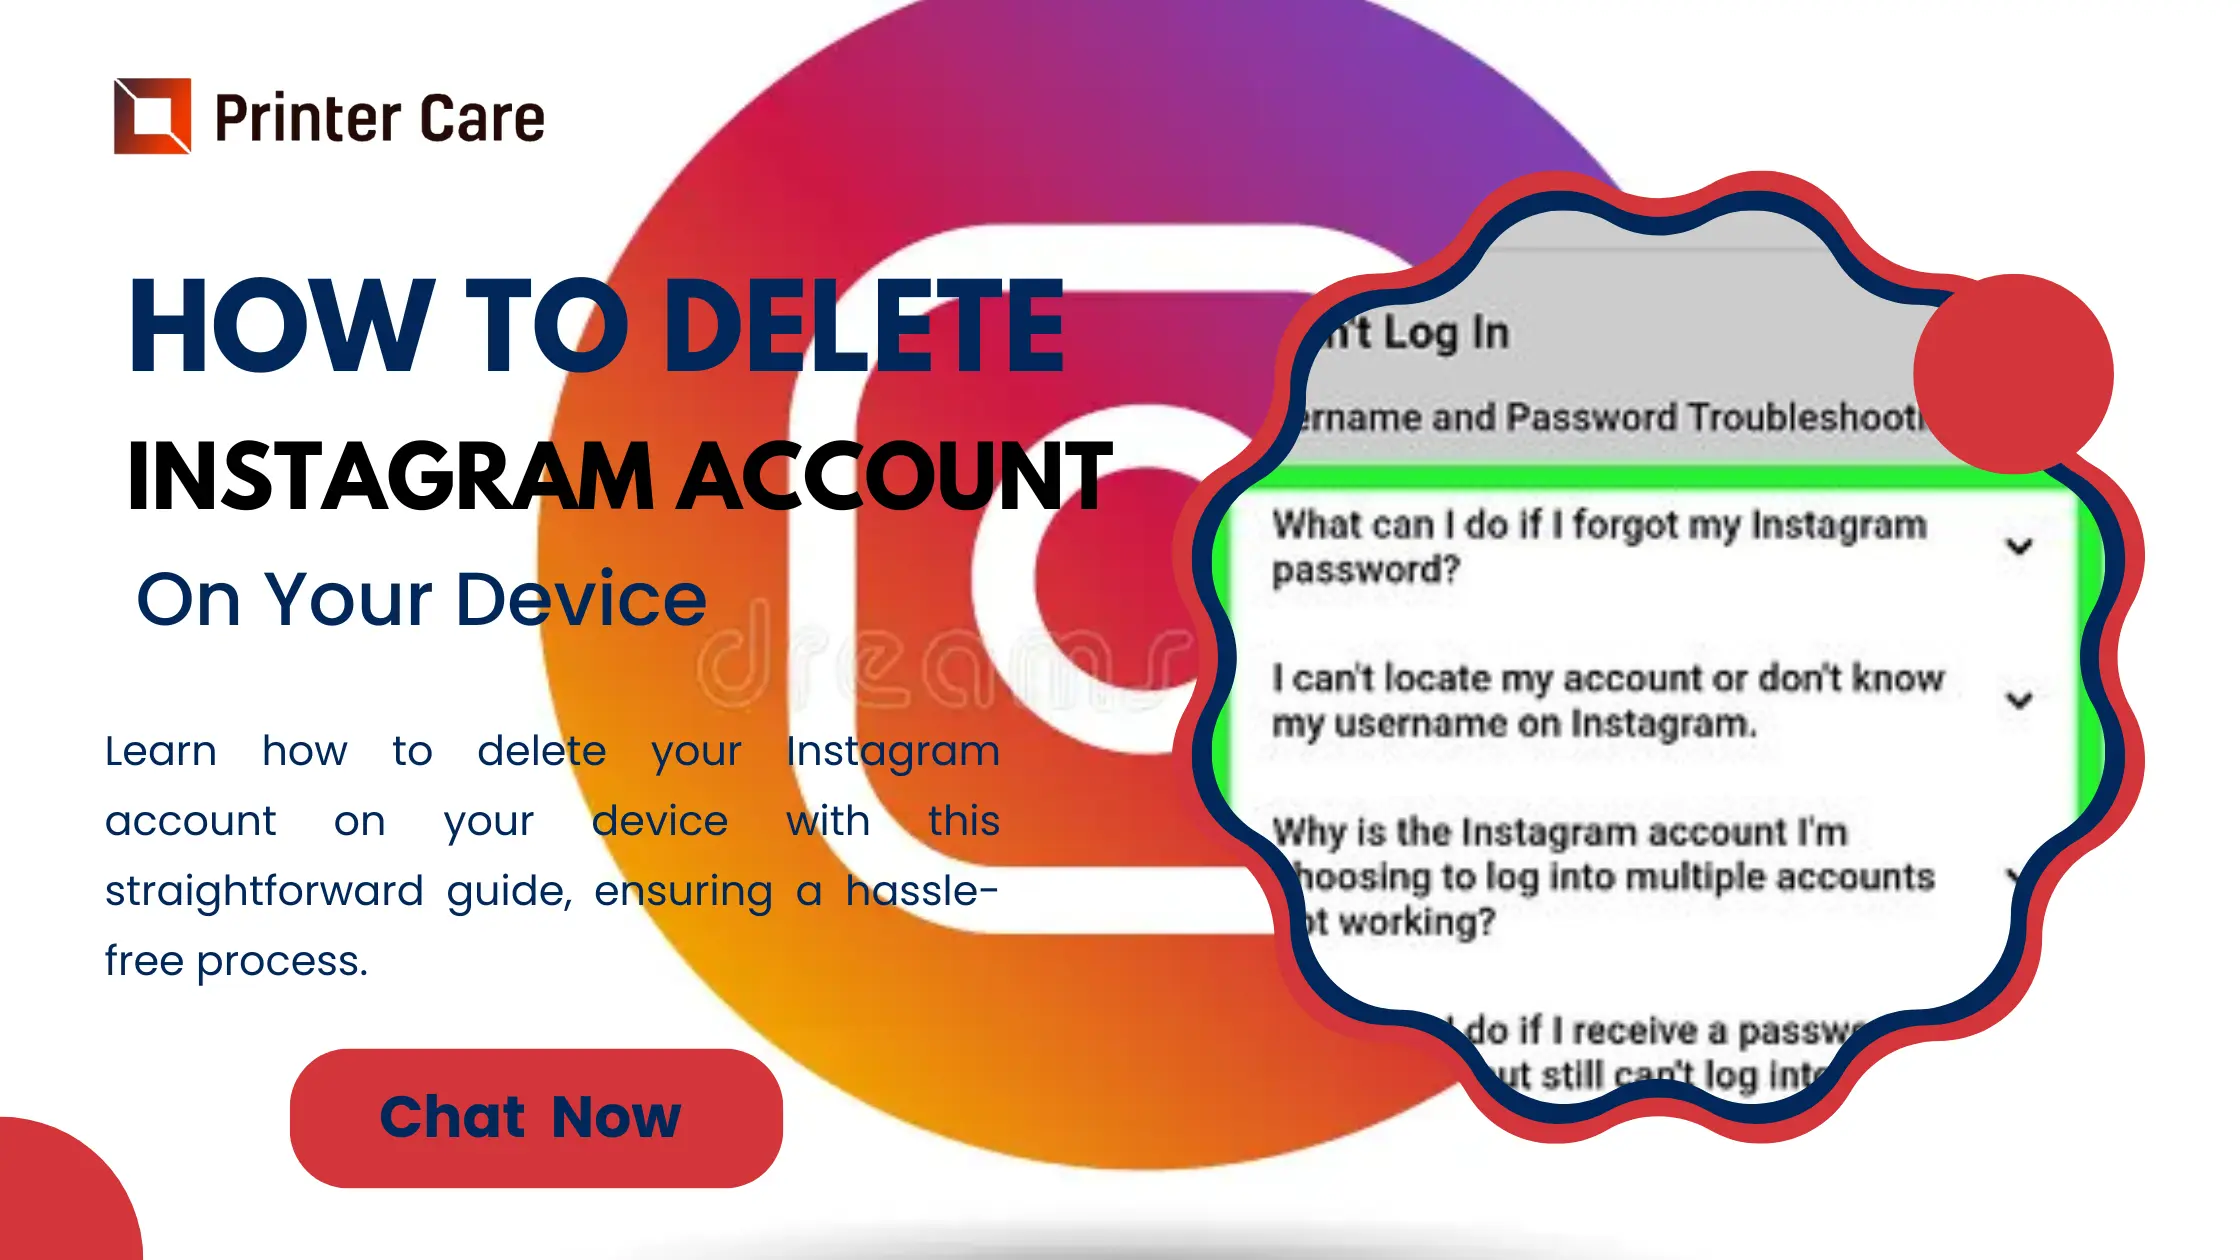 How To Delete Instagram Account On Your Device